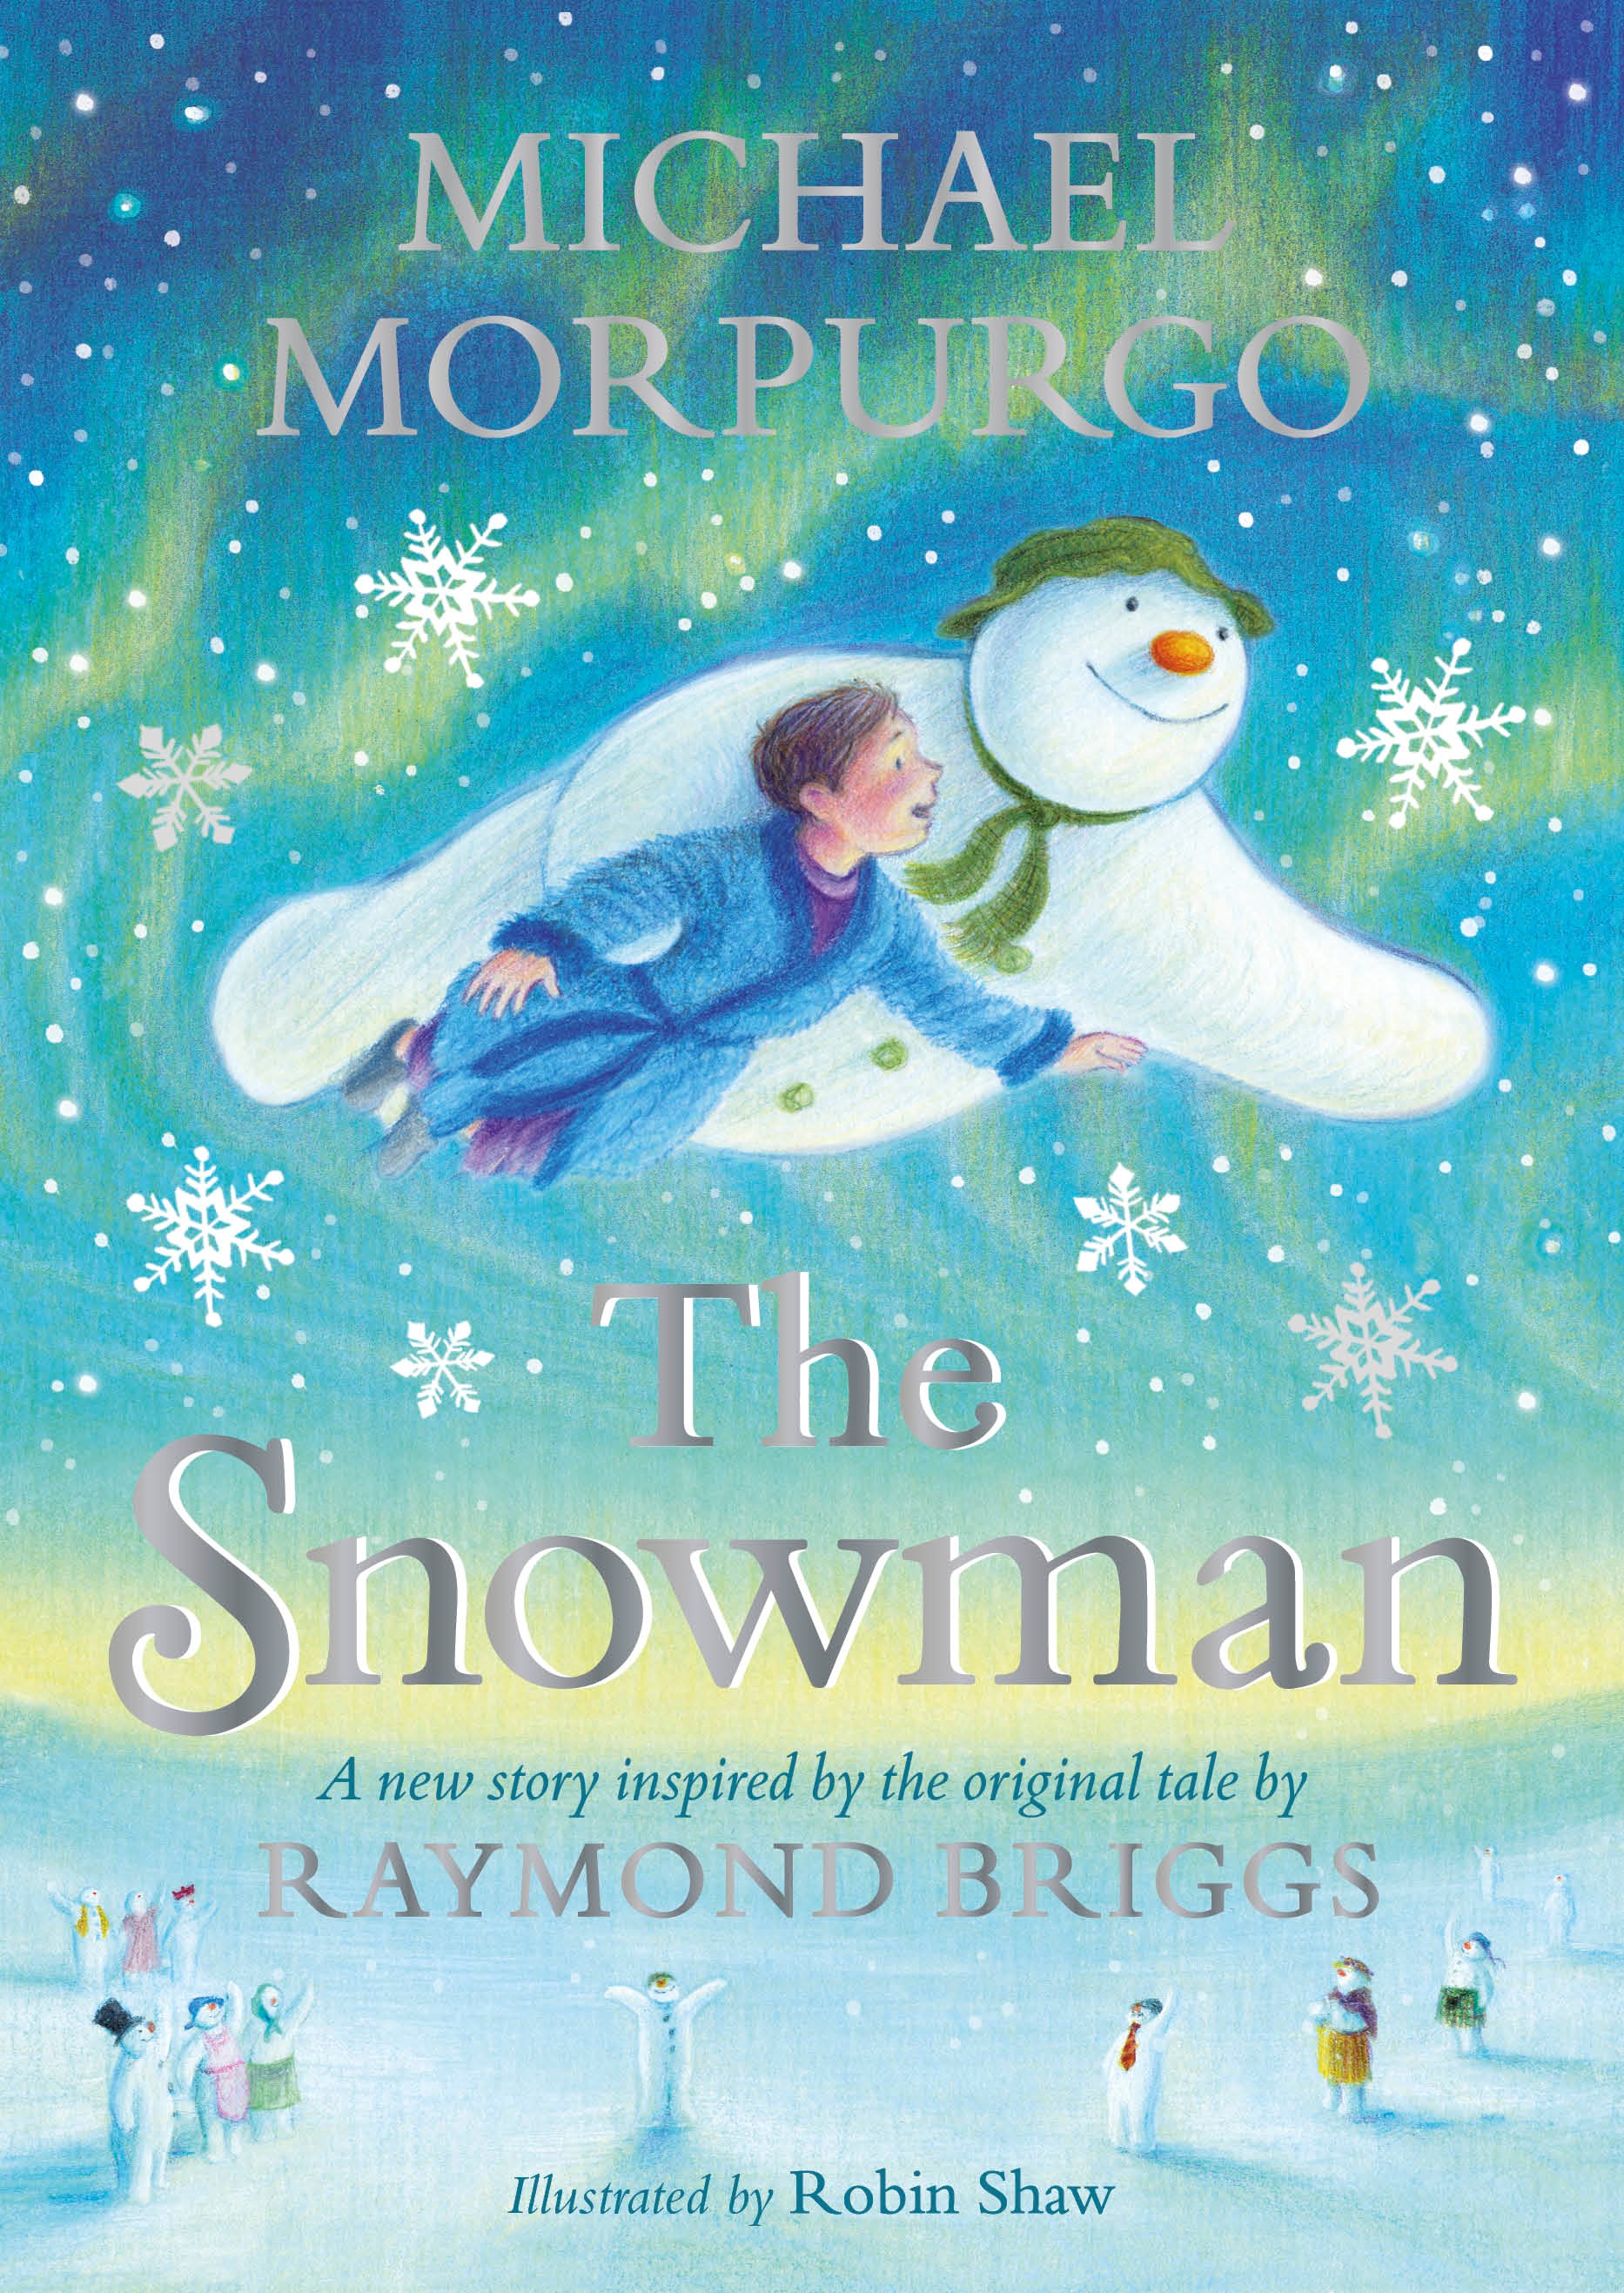 The Snowman by Michael Morpurgo illustrated by Robin Shaw